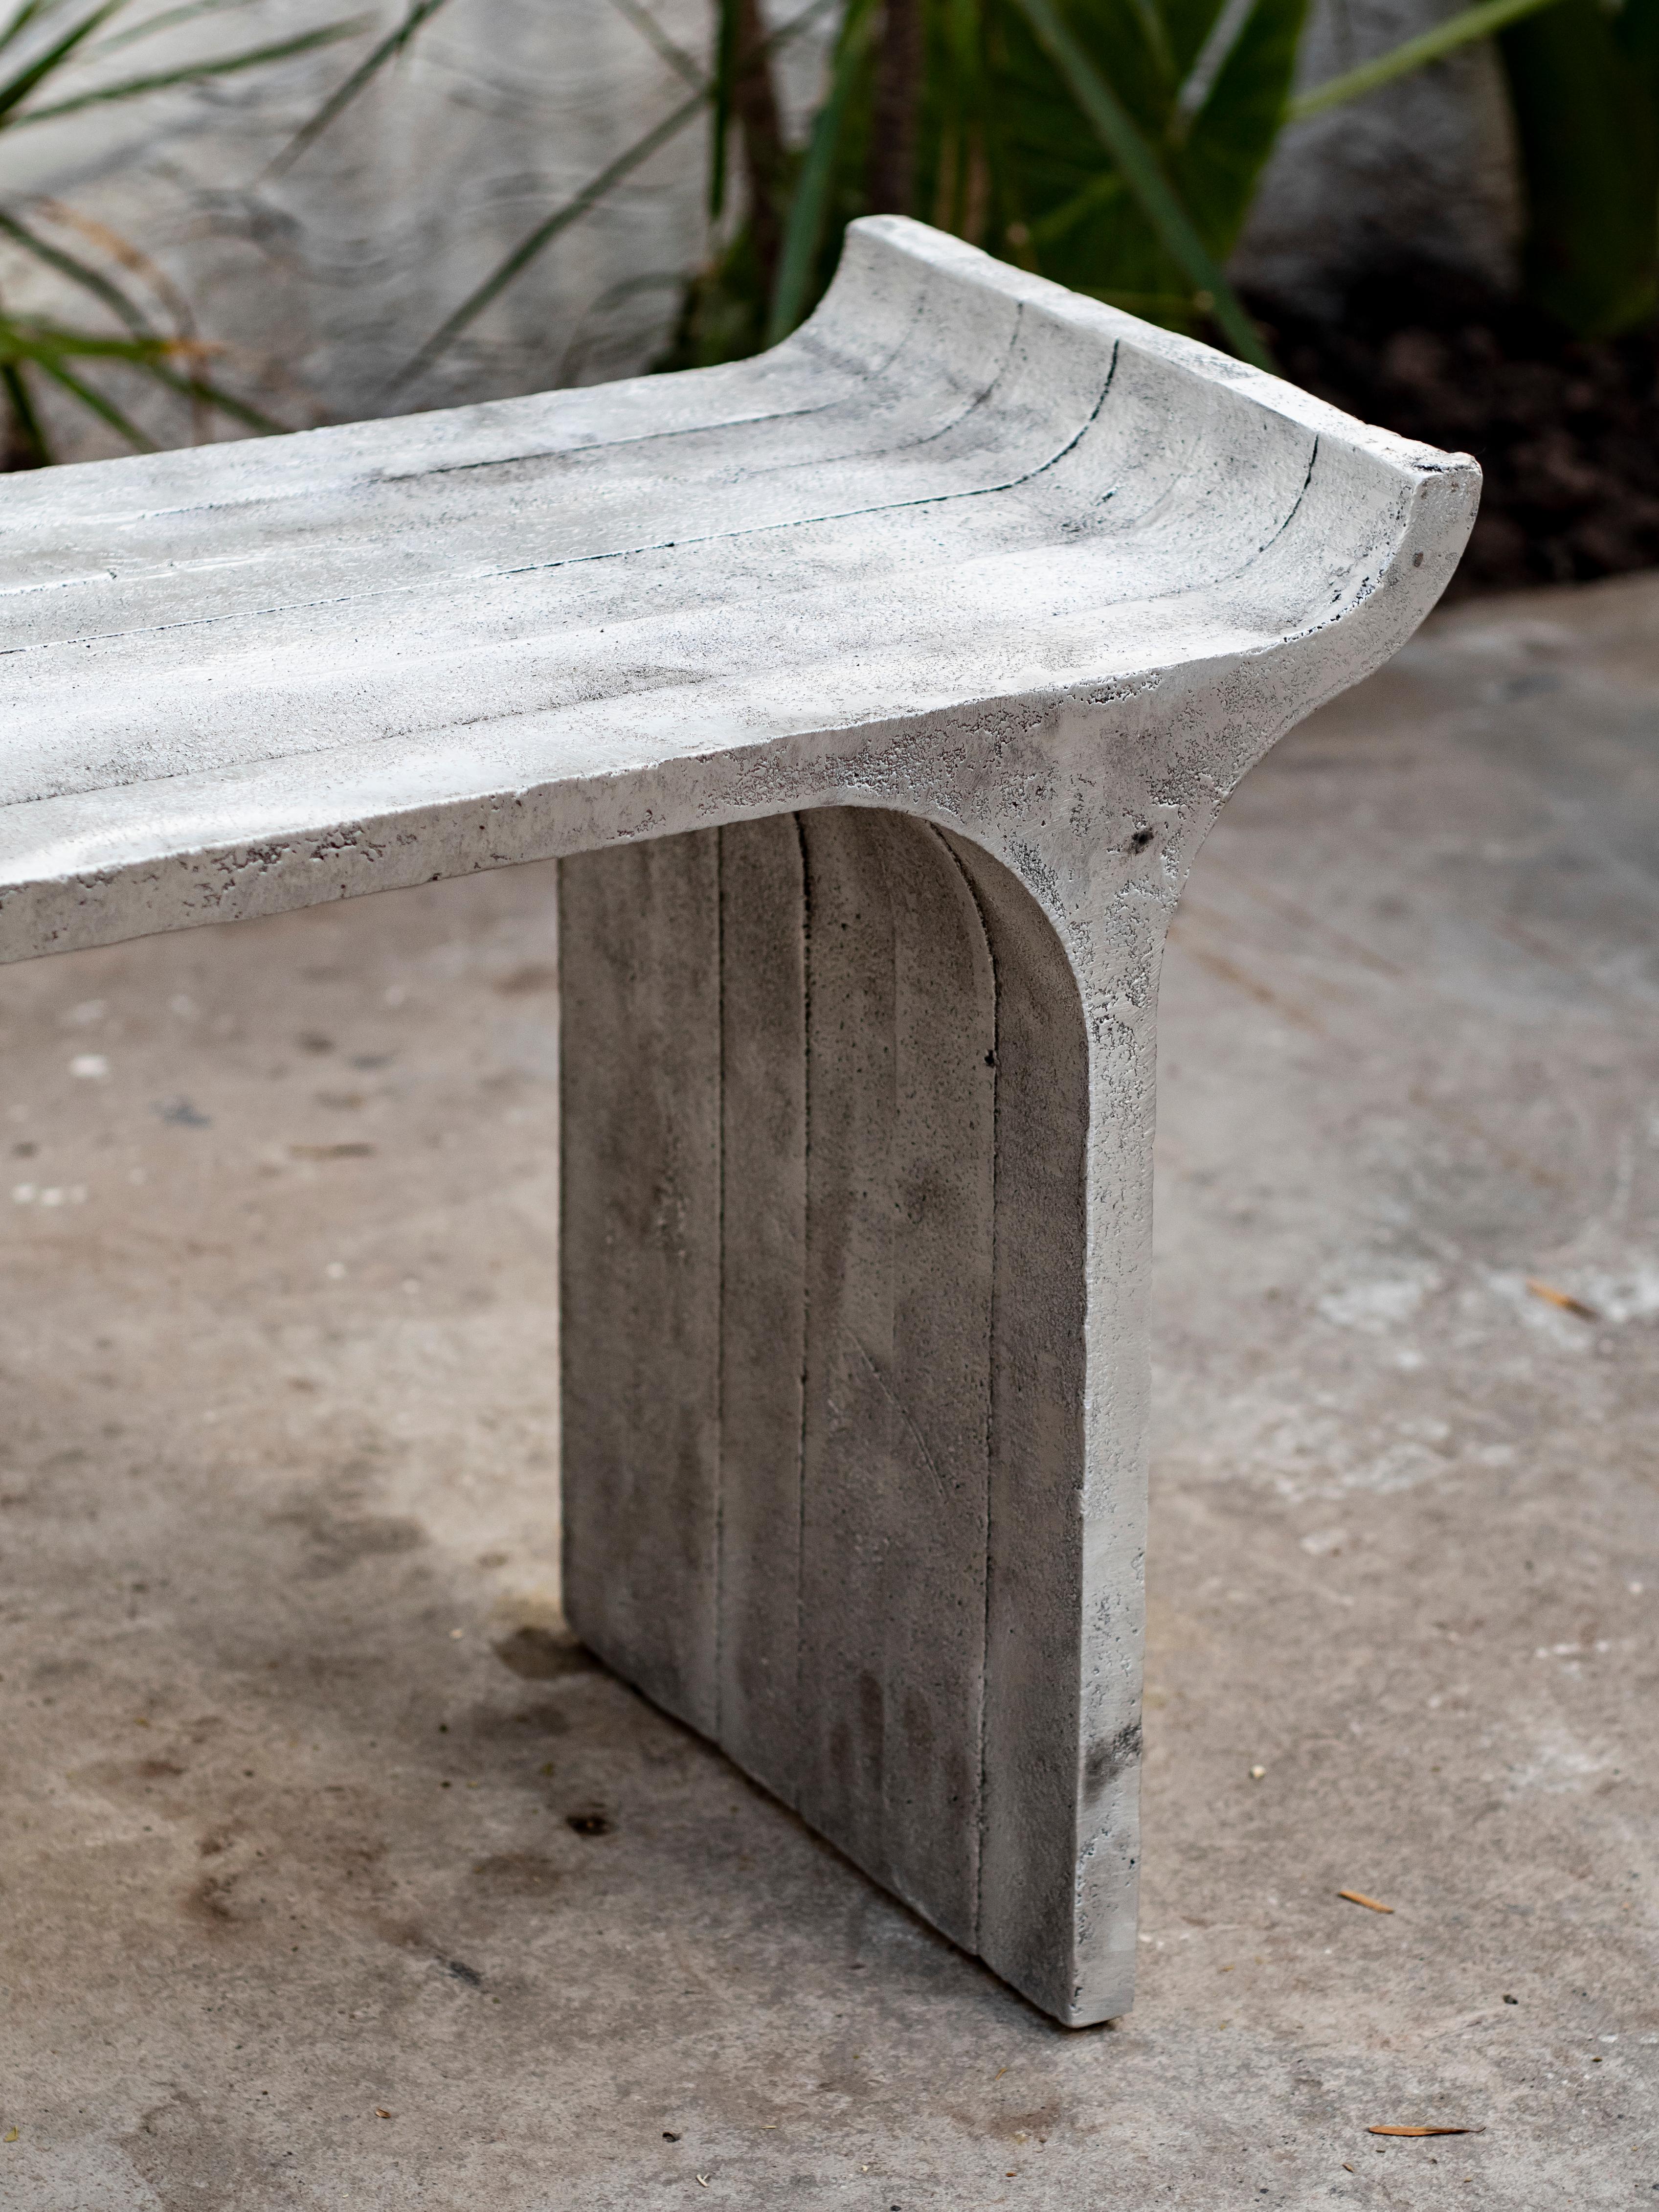 Tori bench by Ries
Dimensions: W150 x D30 x H44 cm 
Materials: Sand cast aluminum

Ries is a design studio based in Buenos Aires, Argentina, focused on product and conemporary furniture design. The studio’s approach to design is influenced by